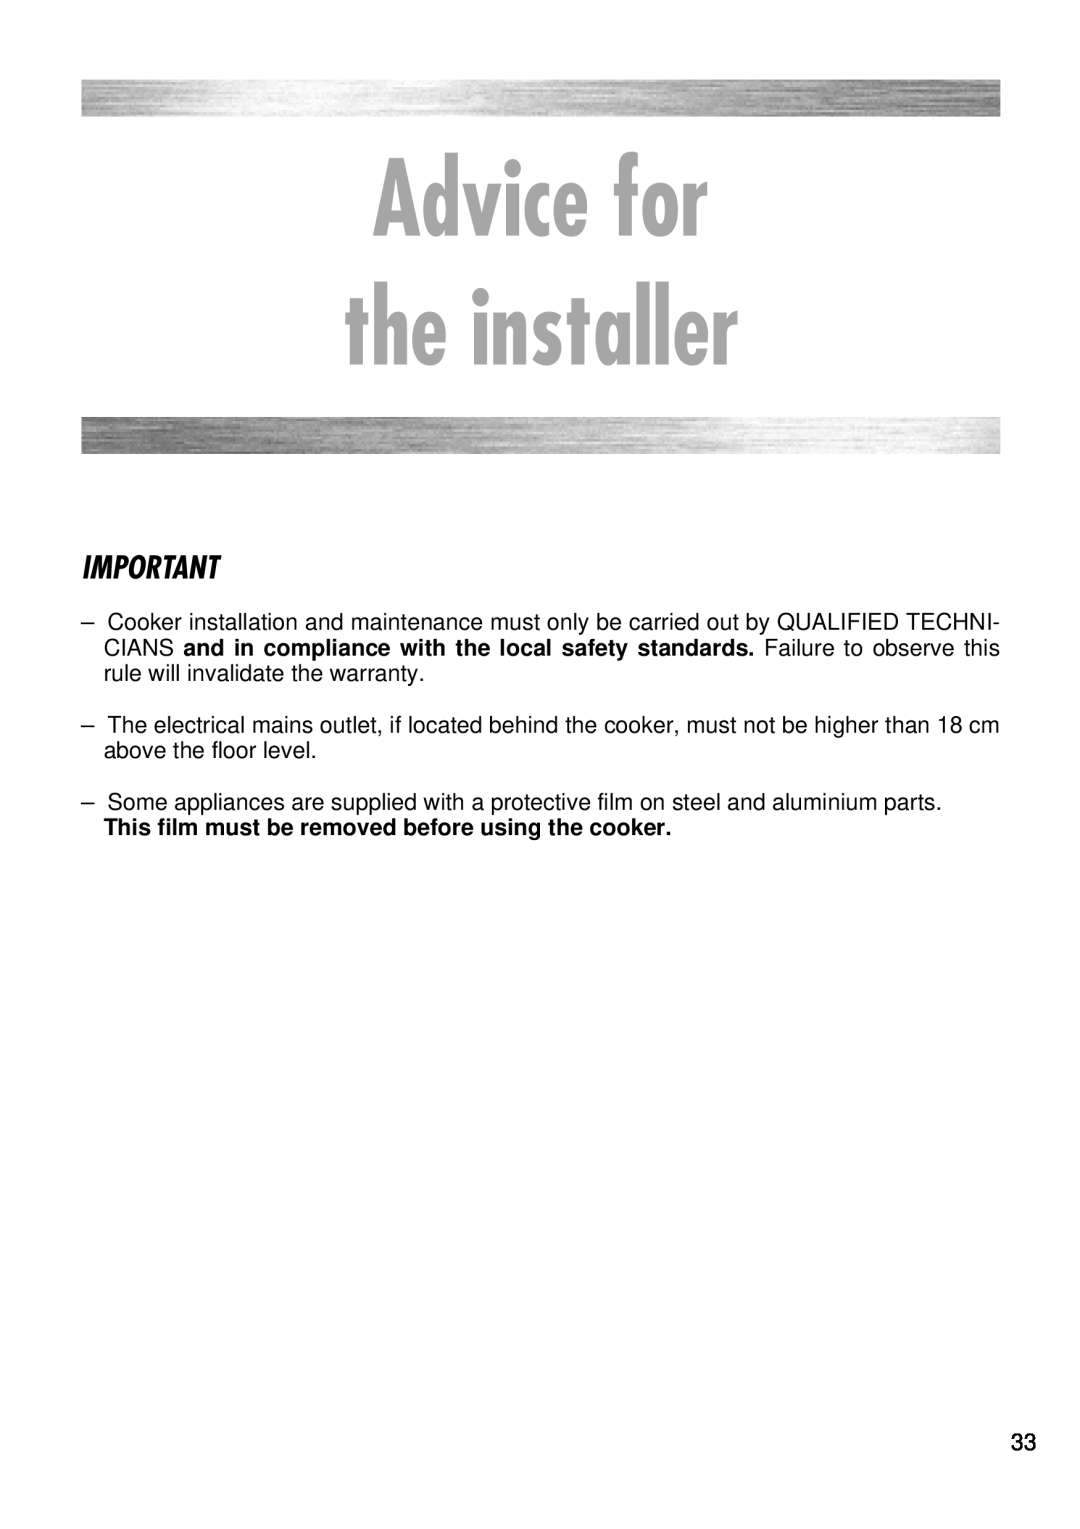 Kenwood CK 740 manual Advice for the installer, This film must be removed before using the cooker 